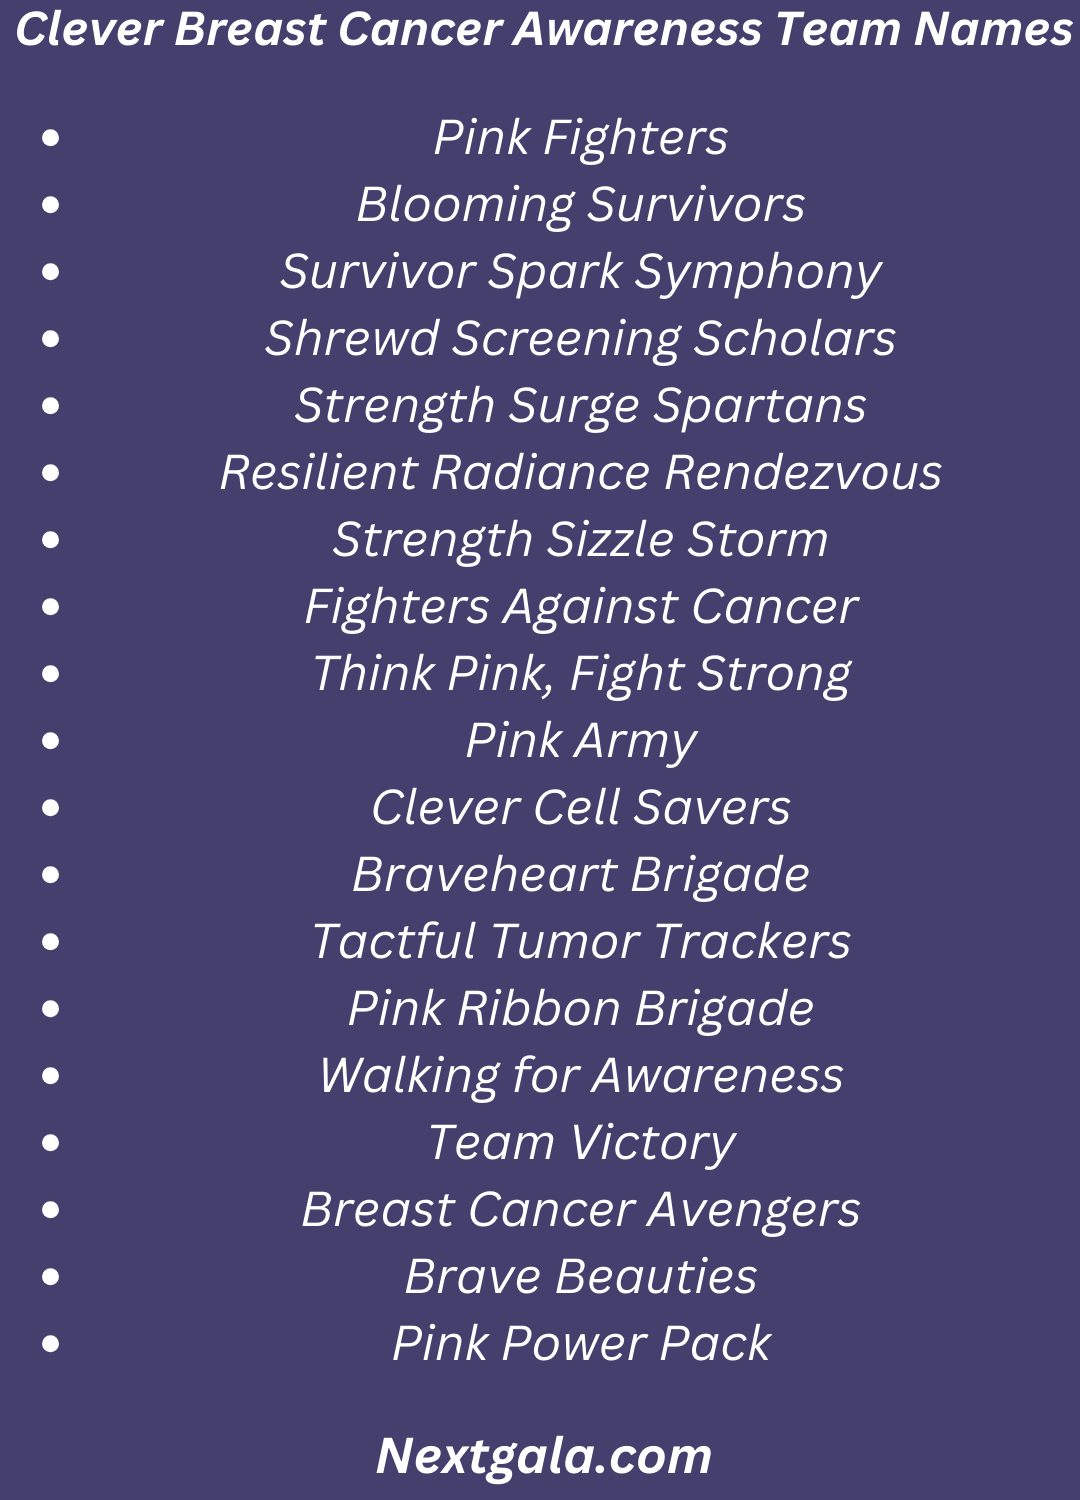 Clever Breast Cancer Awareness Team Names